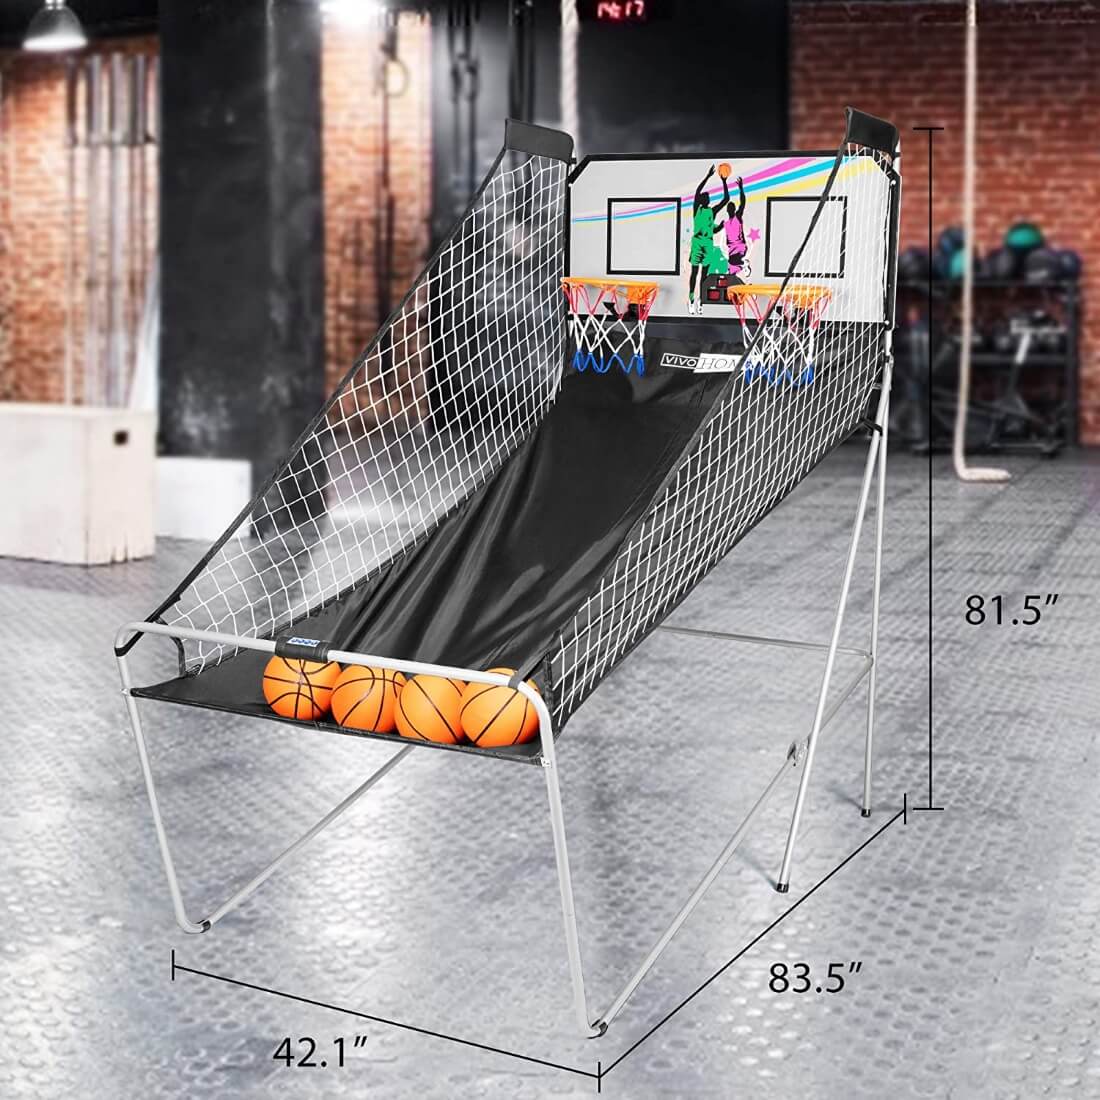 VIVOHOME Foldable Dual Shot Basketball Arcade Game Electronic for 2 Players with 8 Game Modes, 4 Balls and LED Scoring System Arcade Sounds Kids Adults Indoor Outdoor